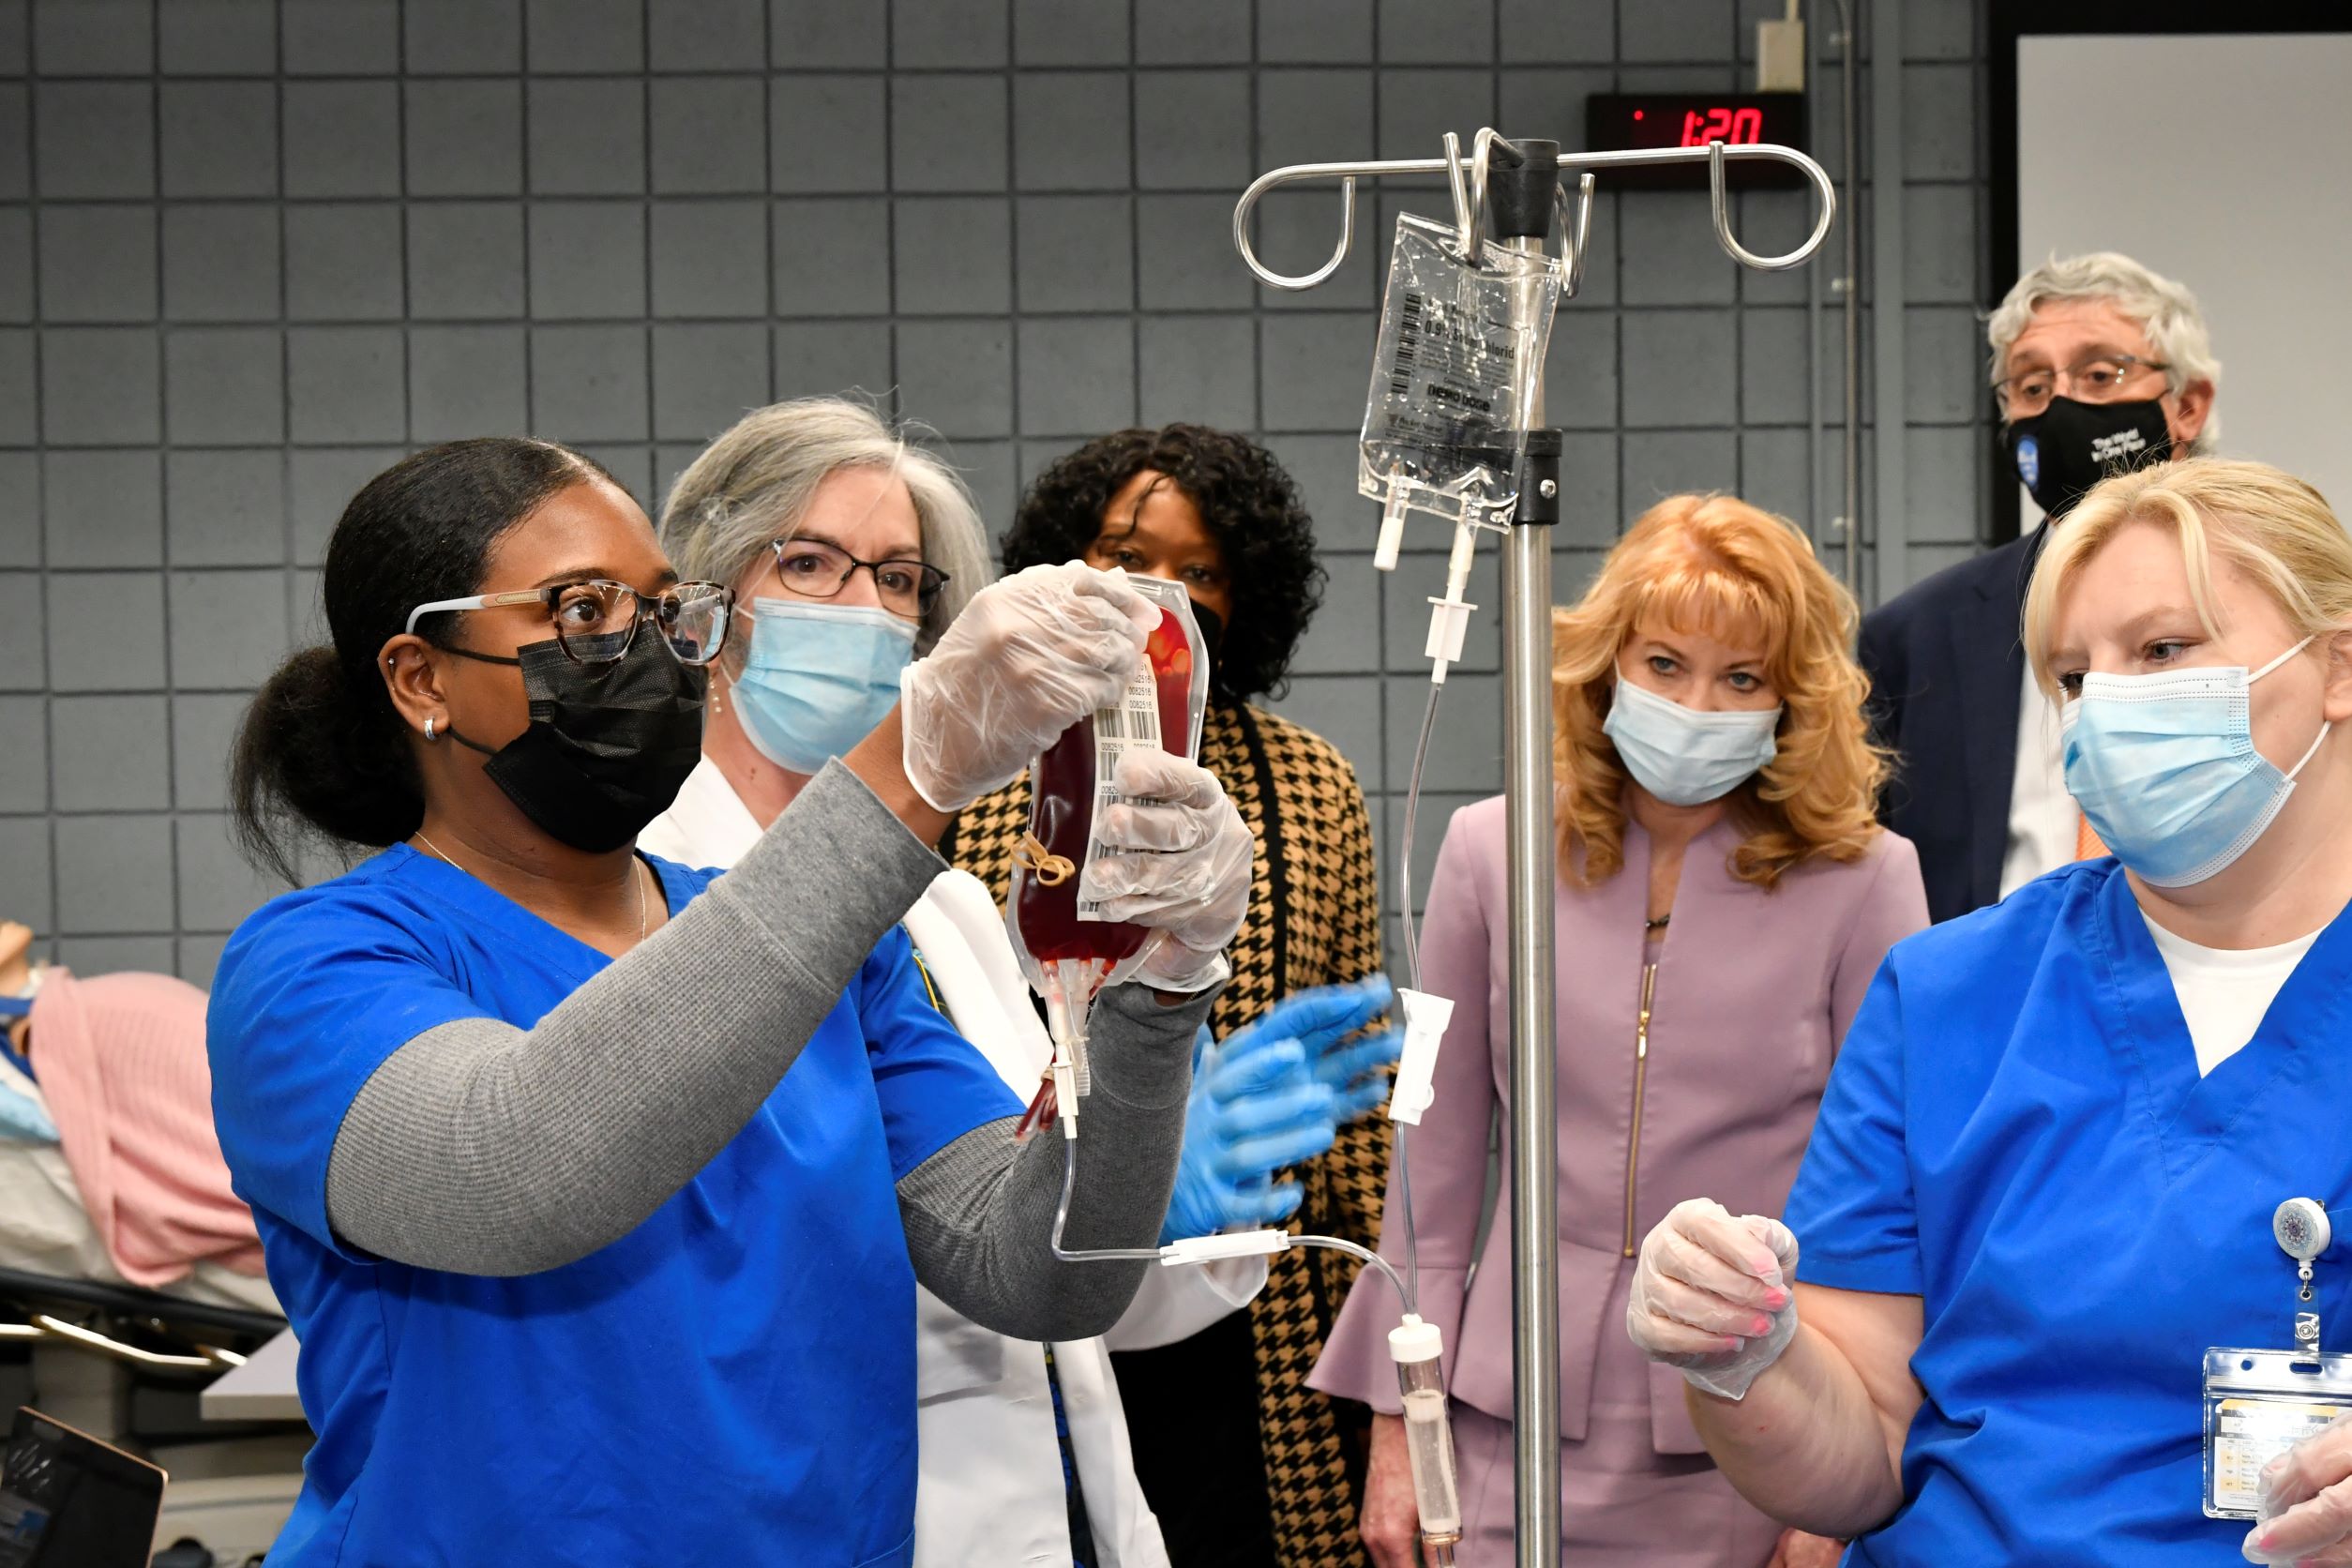 A Treasurer Stacy Garrity visits the College’s Nursing Simulation Laboratory at the Marple Campus in Delaware County to promote the PA 529 College and Career Savings Program. From left: a nursing student; Nursing Clinical Instructor Anne-Marie Guthrie; College President Dr. L. Joy Gates Black; PA Treasurer Stacy Garrity; PA Senator Tim Kearney; a nursing student.